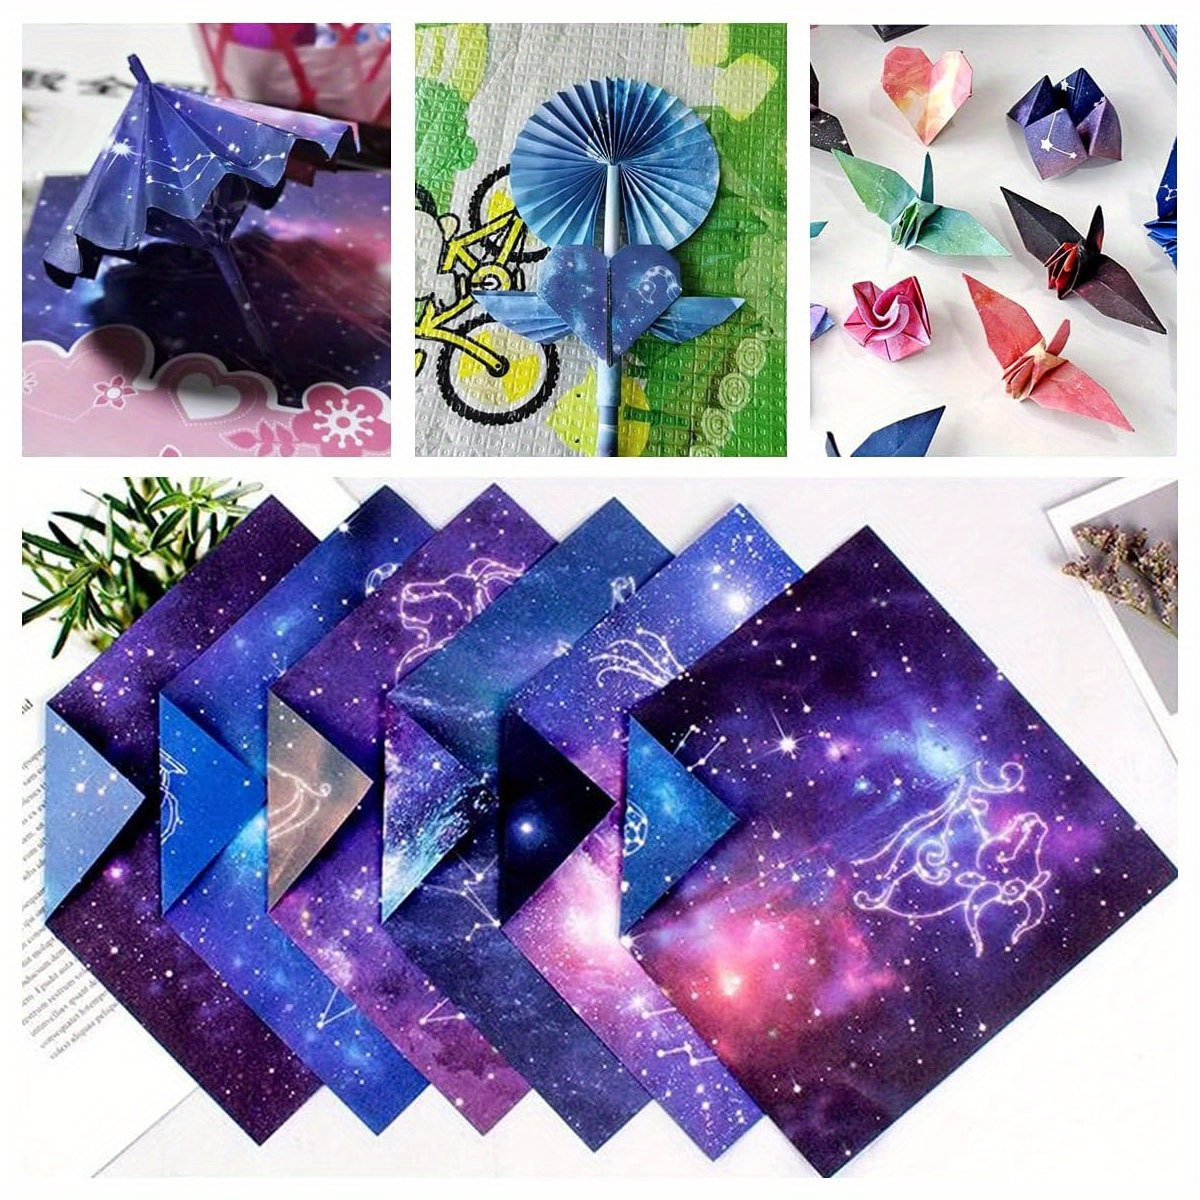 50pcs Origami Paper 6x6 Inch, Double Sided Starry Space Pattern Craft  Folding Paper For DIY Hand Crafts Arts Creativity School Lessons